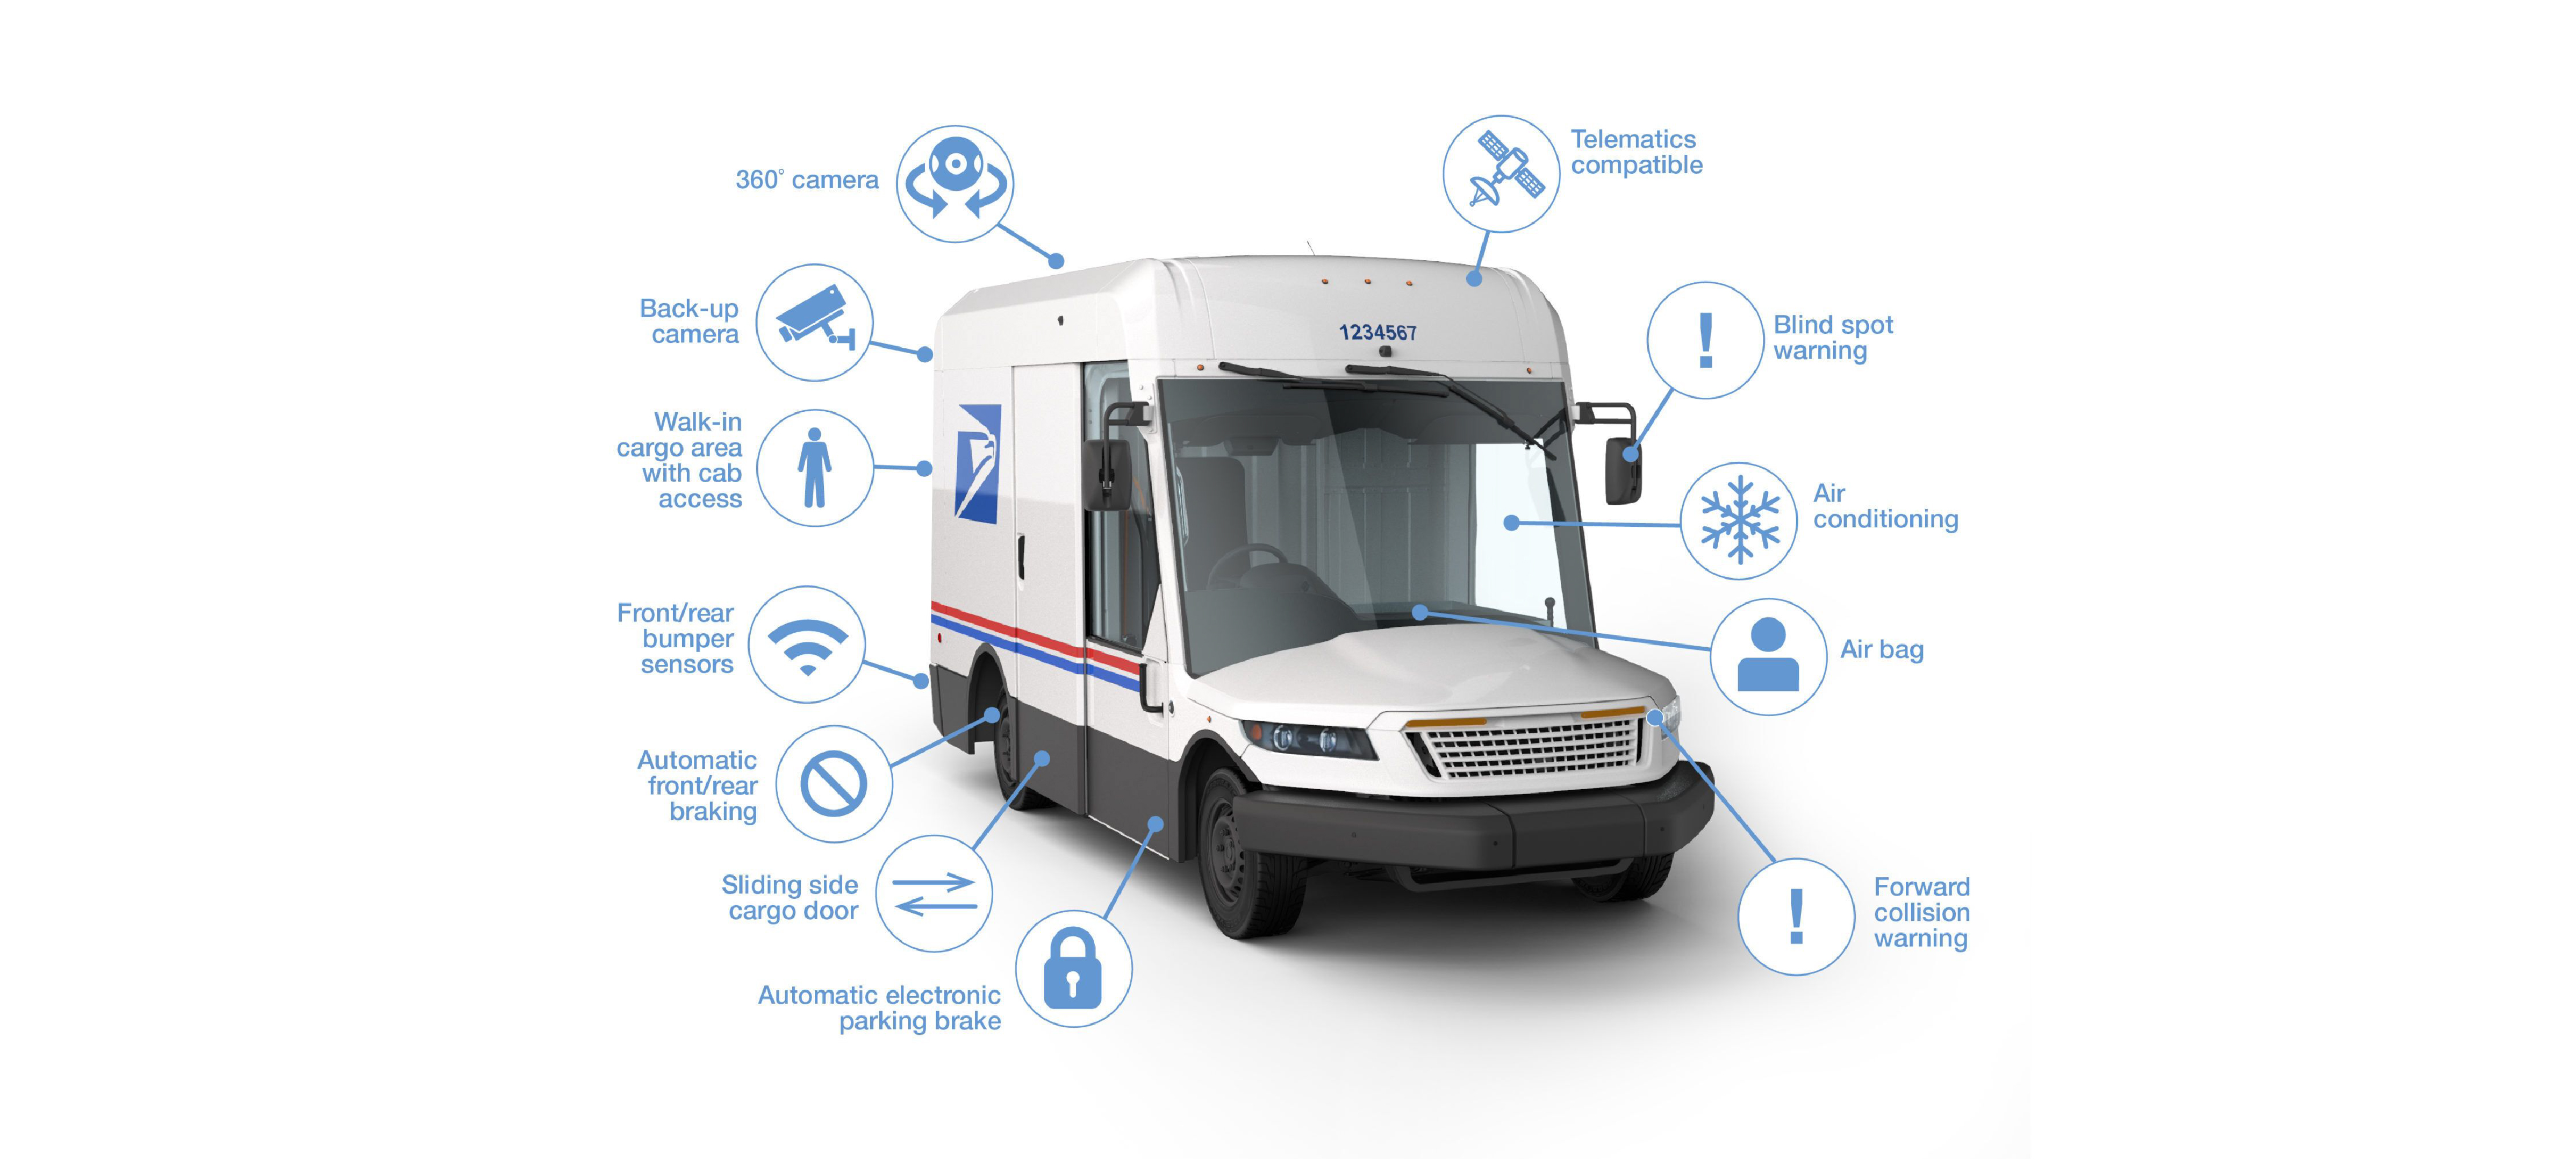 USPS vehicle safety features